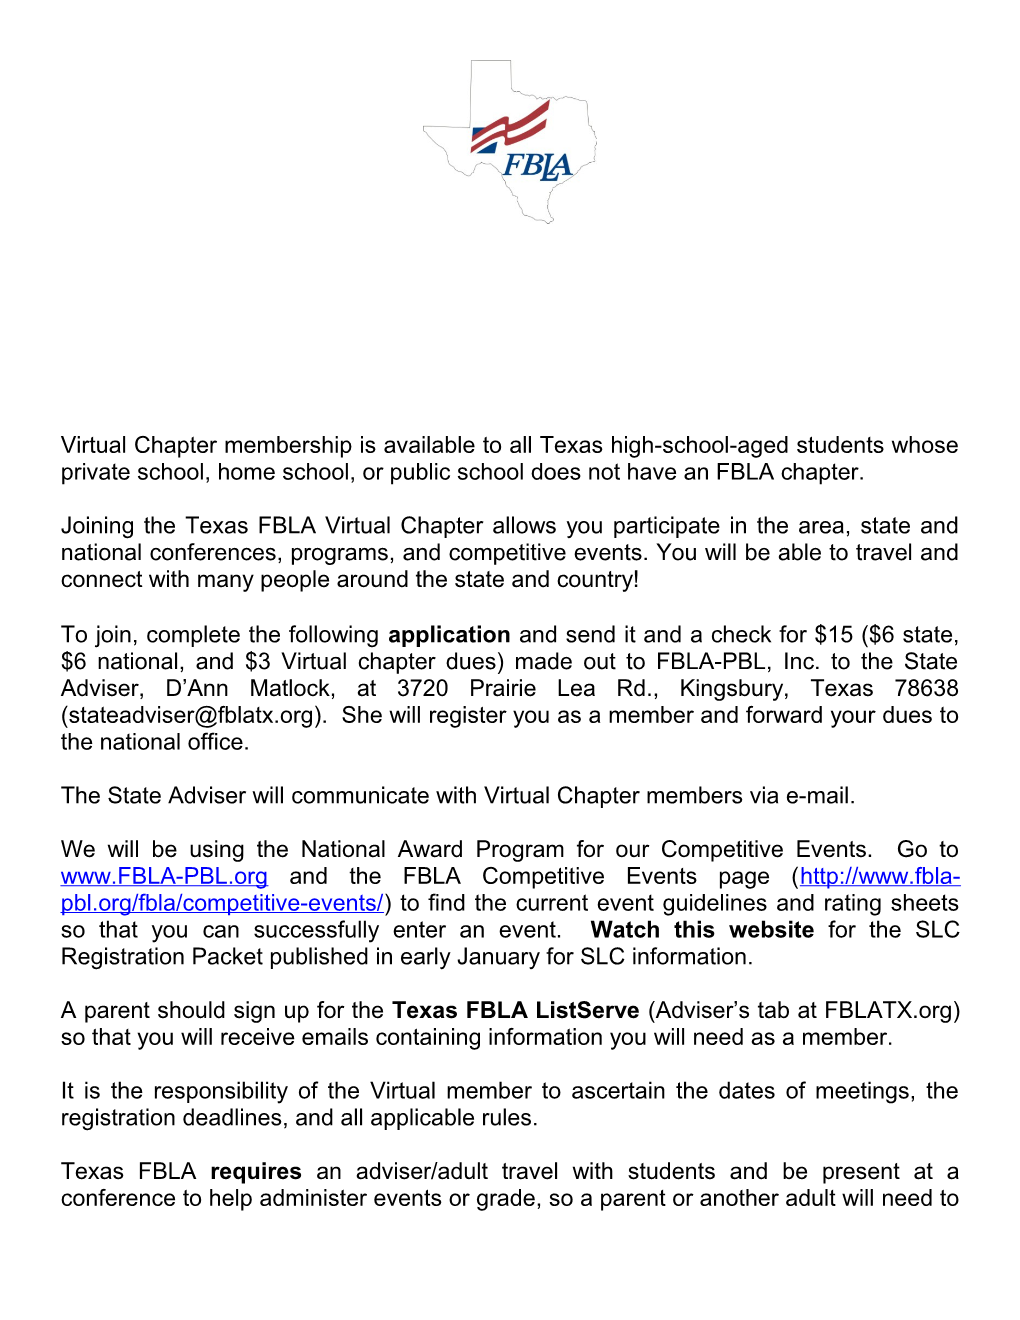 The State Adviser Will Communicate with Virtual Chapter Members Via E-Mail